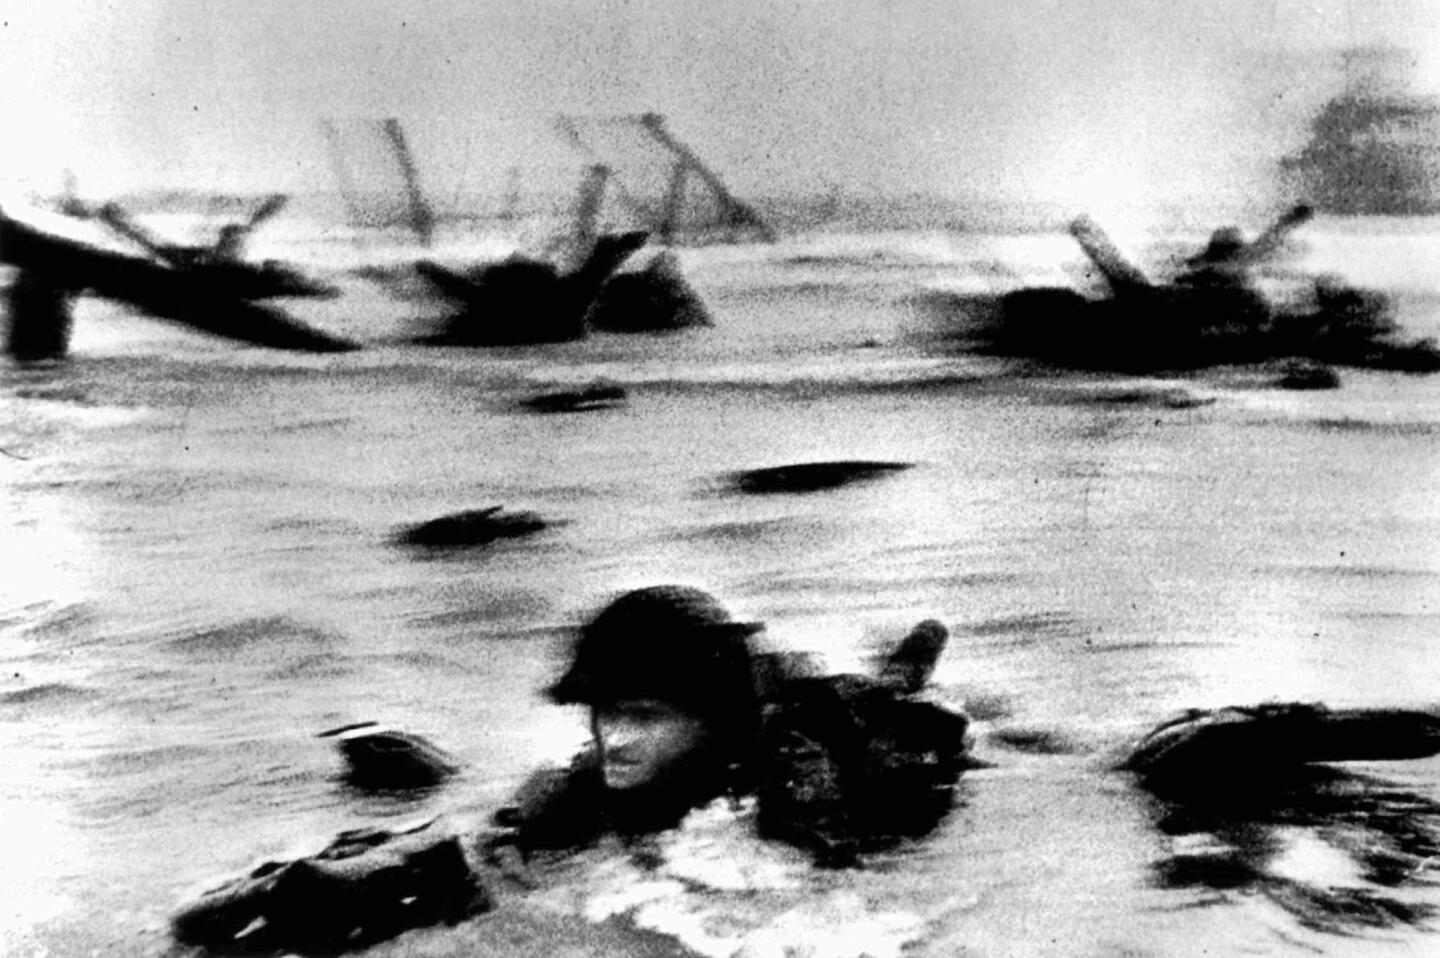 "D-Day, Omaha Beach," Robert Capa's photo of the 1944 Normandy invasion, survived darkroom mishaps to convey with its grainy look much of the urgent drama of the occasion.